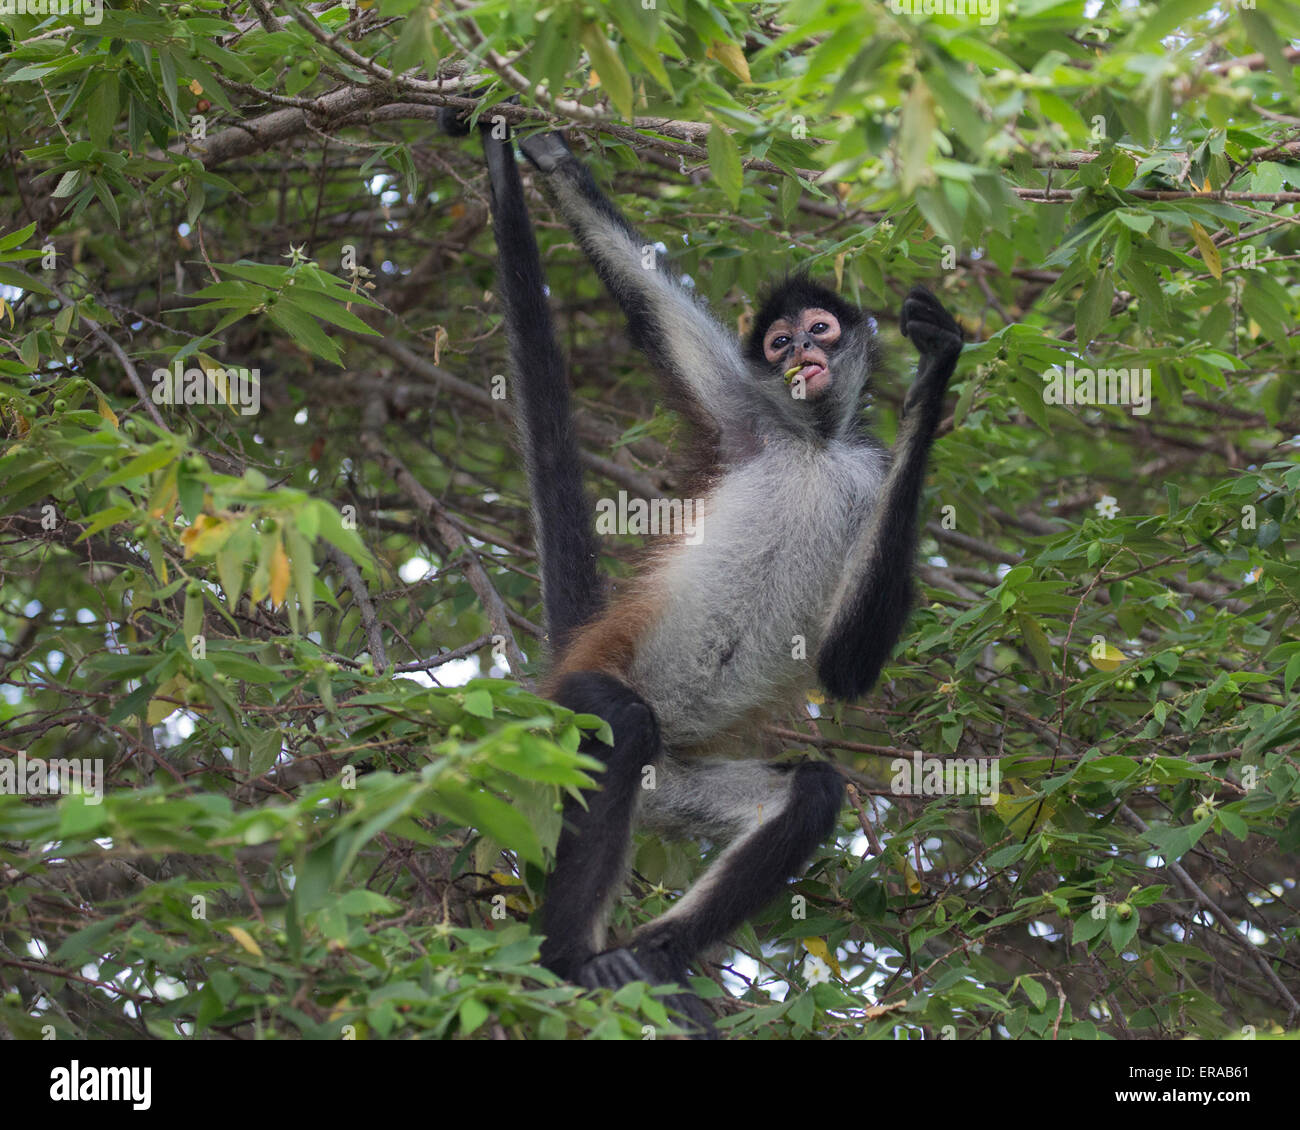 Geoffroy's spider monkey (Ateles geoffroyi), aka Black-handed Spider Monkey hanging from tree branch in Mexican tropical forest habitat Stock Photo